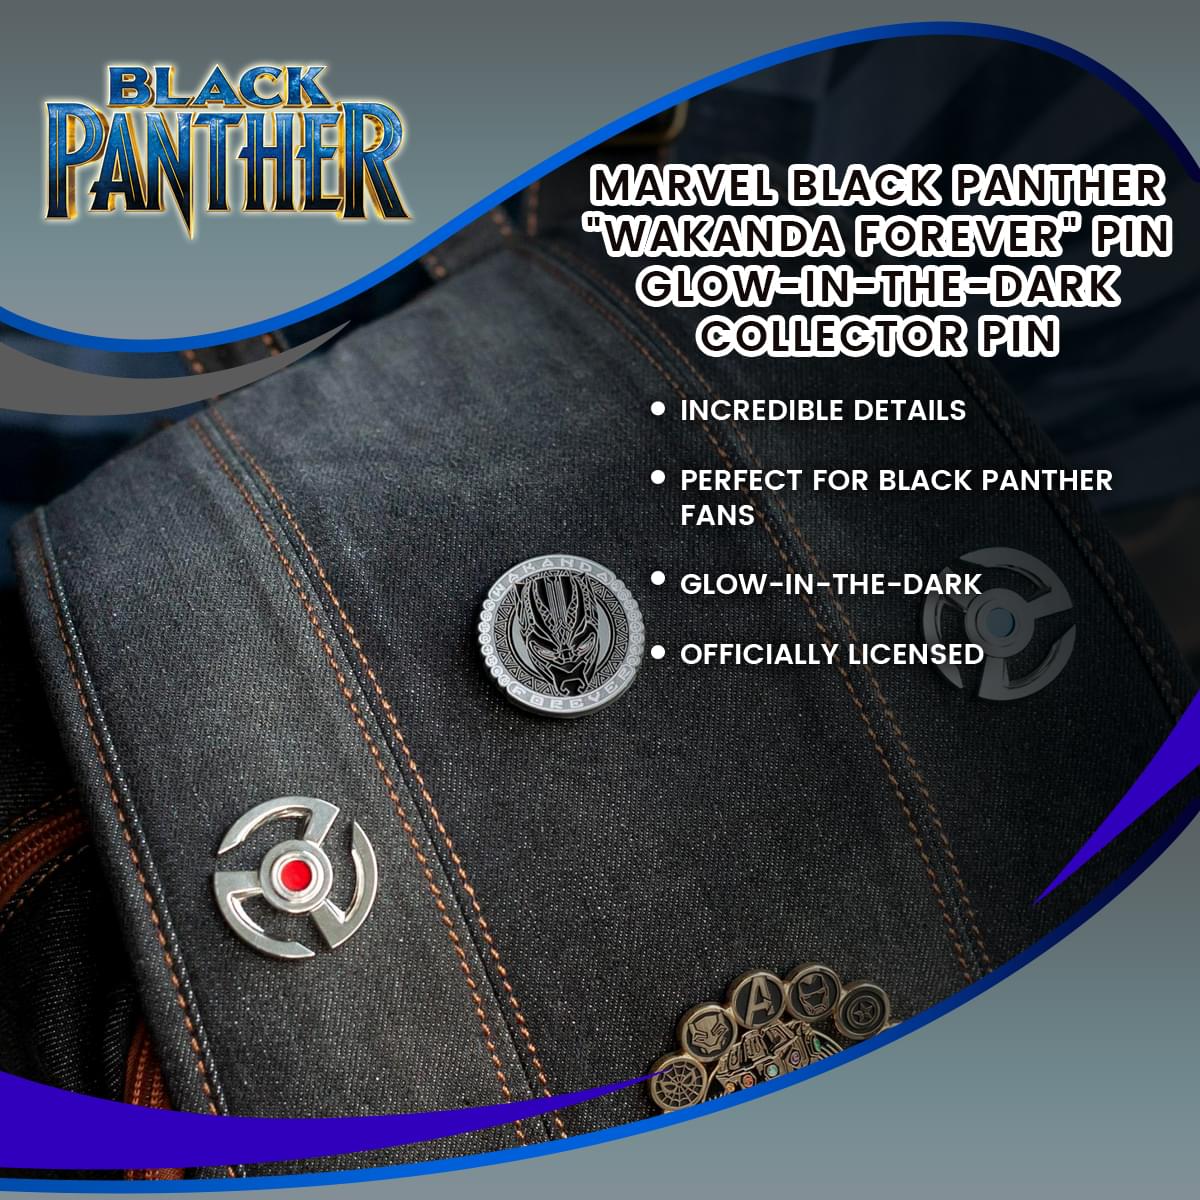 Marvel Black Panther "Wakanda Forever" Pin | Glow-In-The-Dark Collector Pin